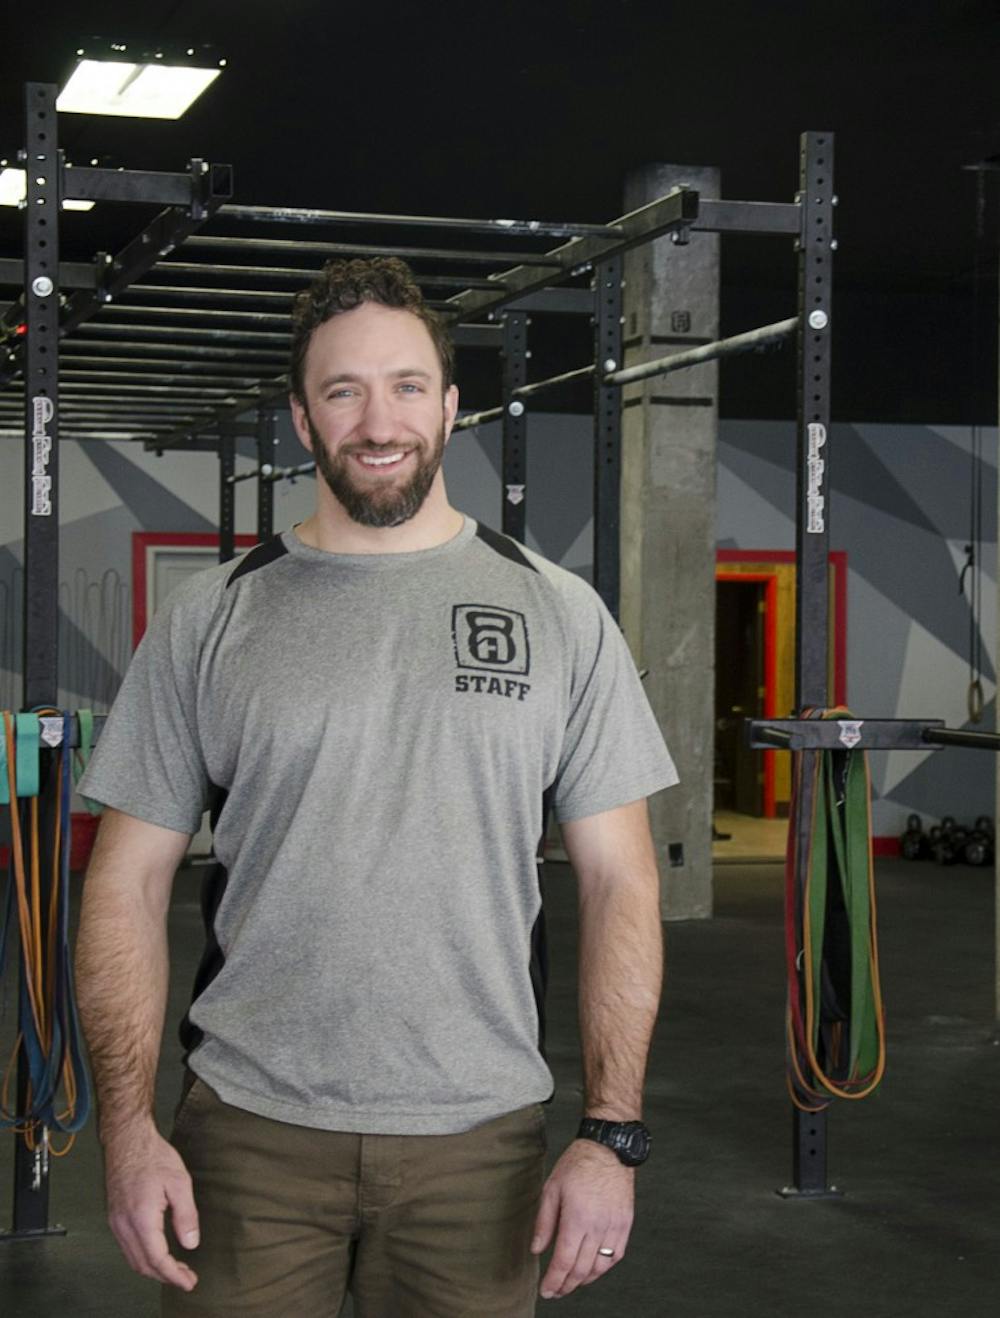 <p>BJ McKay is the owner of The Arsenal in downtown Muncie. McKay prides his business on seven principles in the gym to promote a community feeling; loyalty, duty, respect/honor, selflessness, humility, integrity and positive action. DN PHOTO BREANNA DAUGHERTY</p>